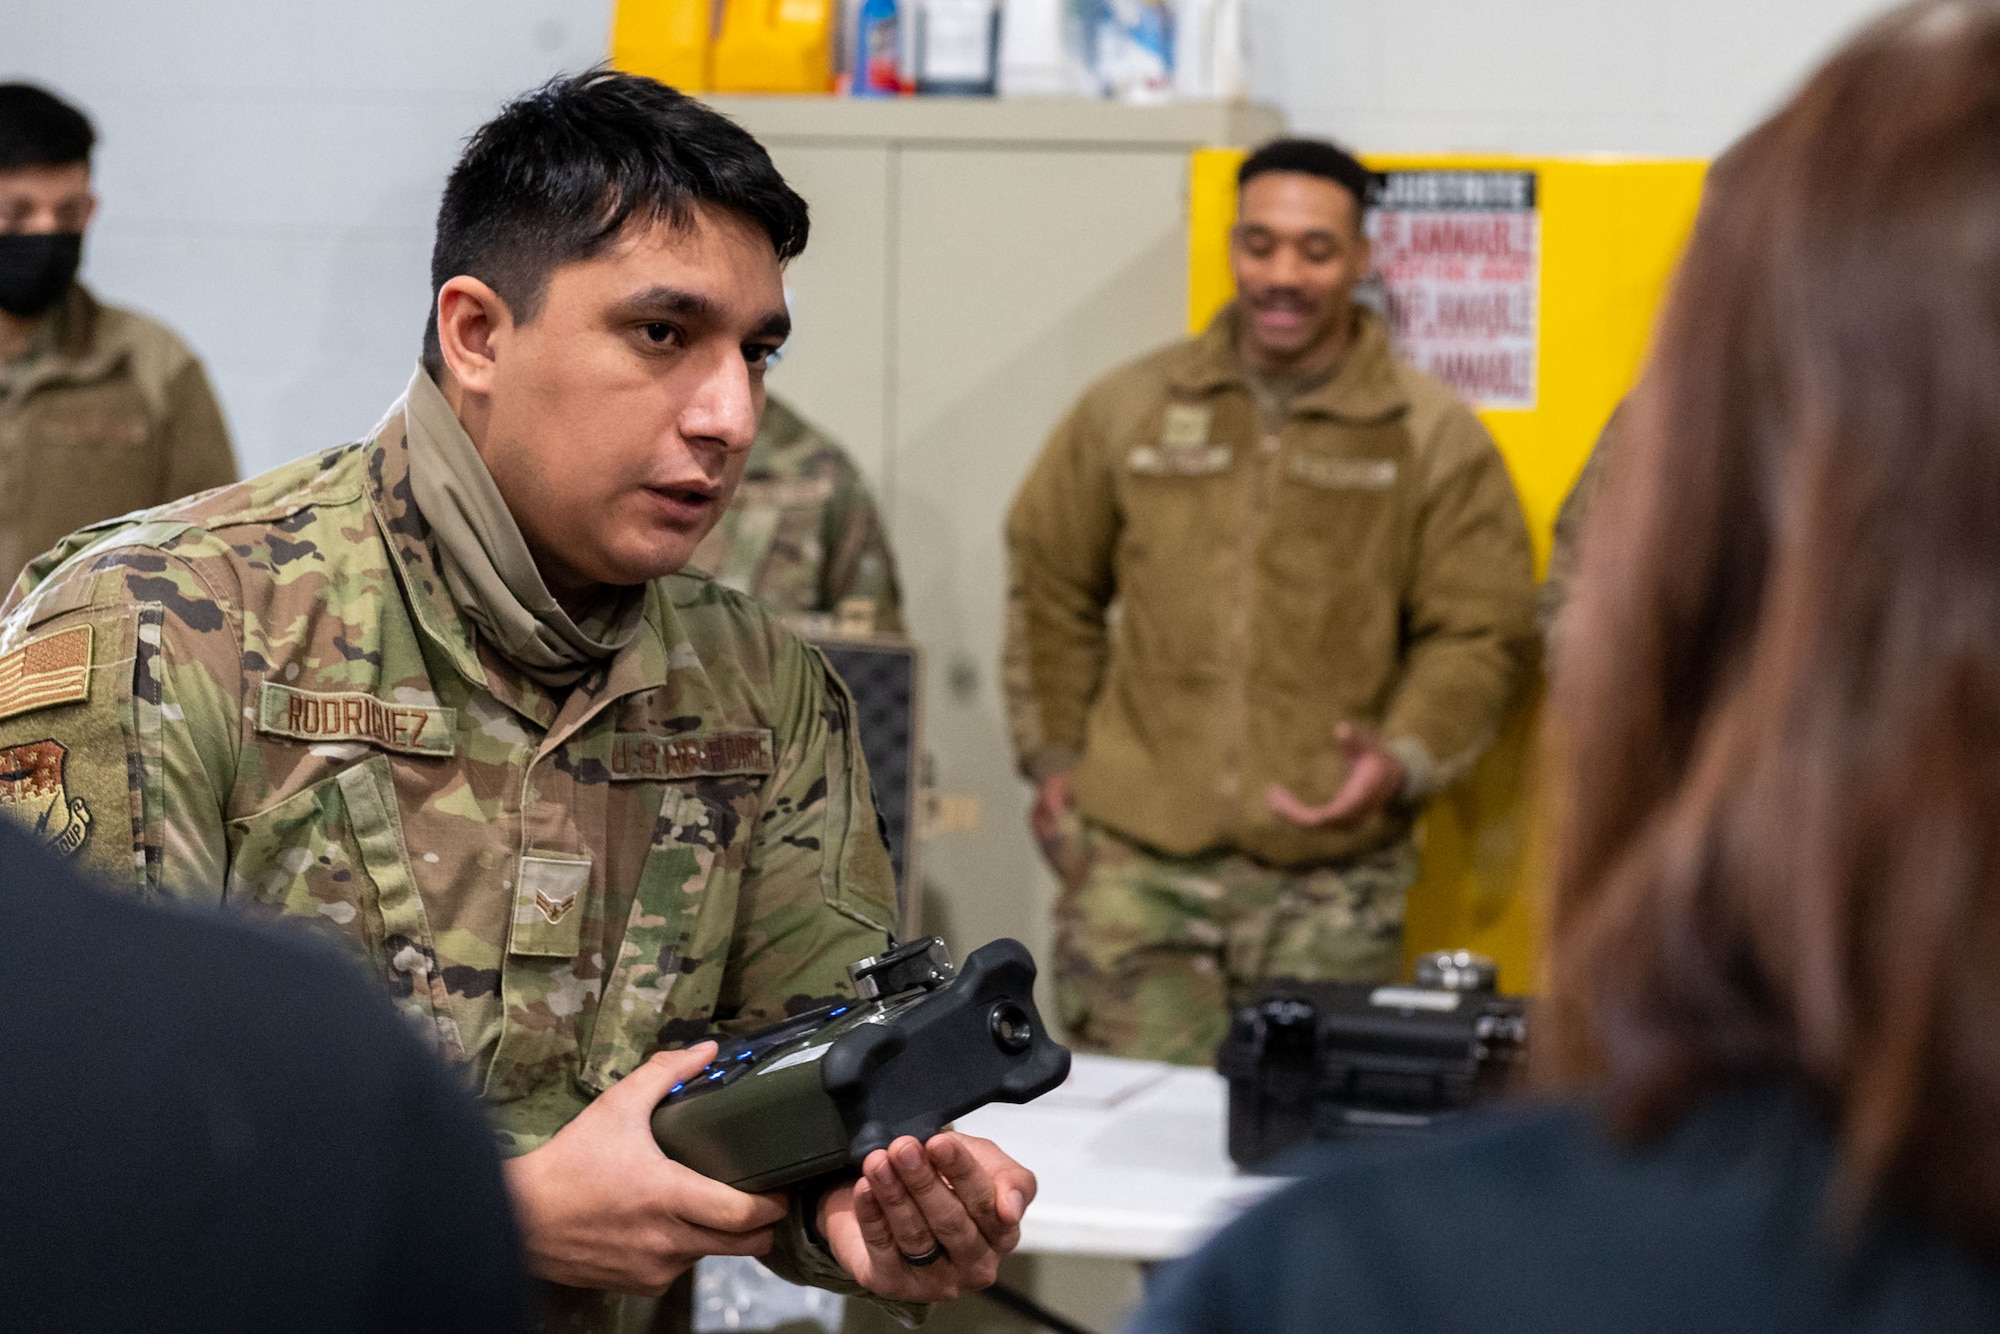 Airman 1st Class Raul Rodriguez, 341st Medical Group medical journeyman, briefs FBI agents on the importance of responding quickly to radiation poisoning March 8, 2022, during a joint-training event at Malmstrom Air Force Base, Mont. Medical personnel work cooperatively with agencies, such as the FBI, to provide critical information during emergency situations.
(U.S. Air Force photo by Airman 1st Class Elijah Van Zandt)